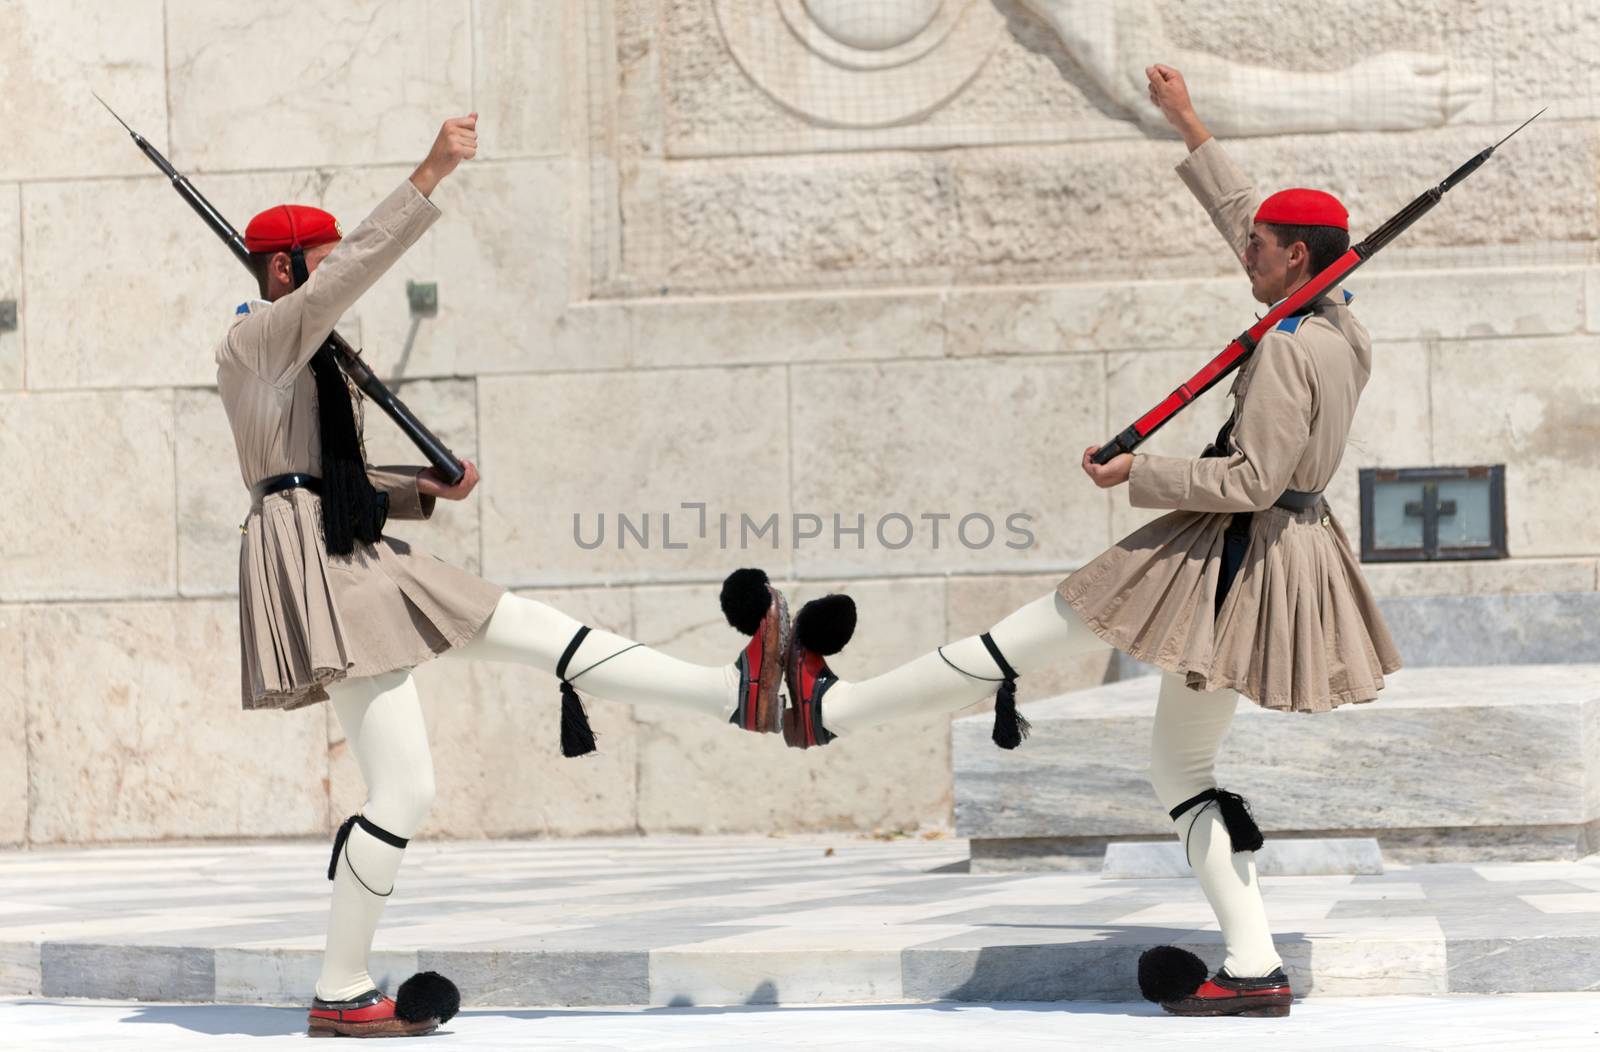 ATHENS, GREECE - JULY 23: Evzones (presidential guards) watches over the monument of the Unknown Soldier in front of the Greek Parliament Building at Syntagma Square on July 23, 2010 in Athens, Greece. Evzoni, is the name of historical elite mountain units of Greek Army.